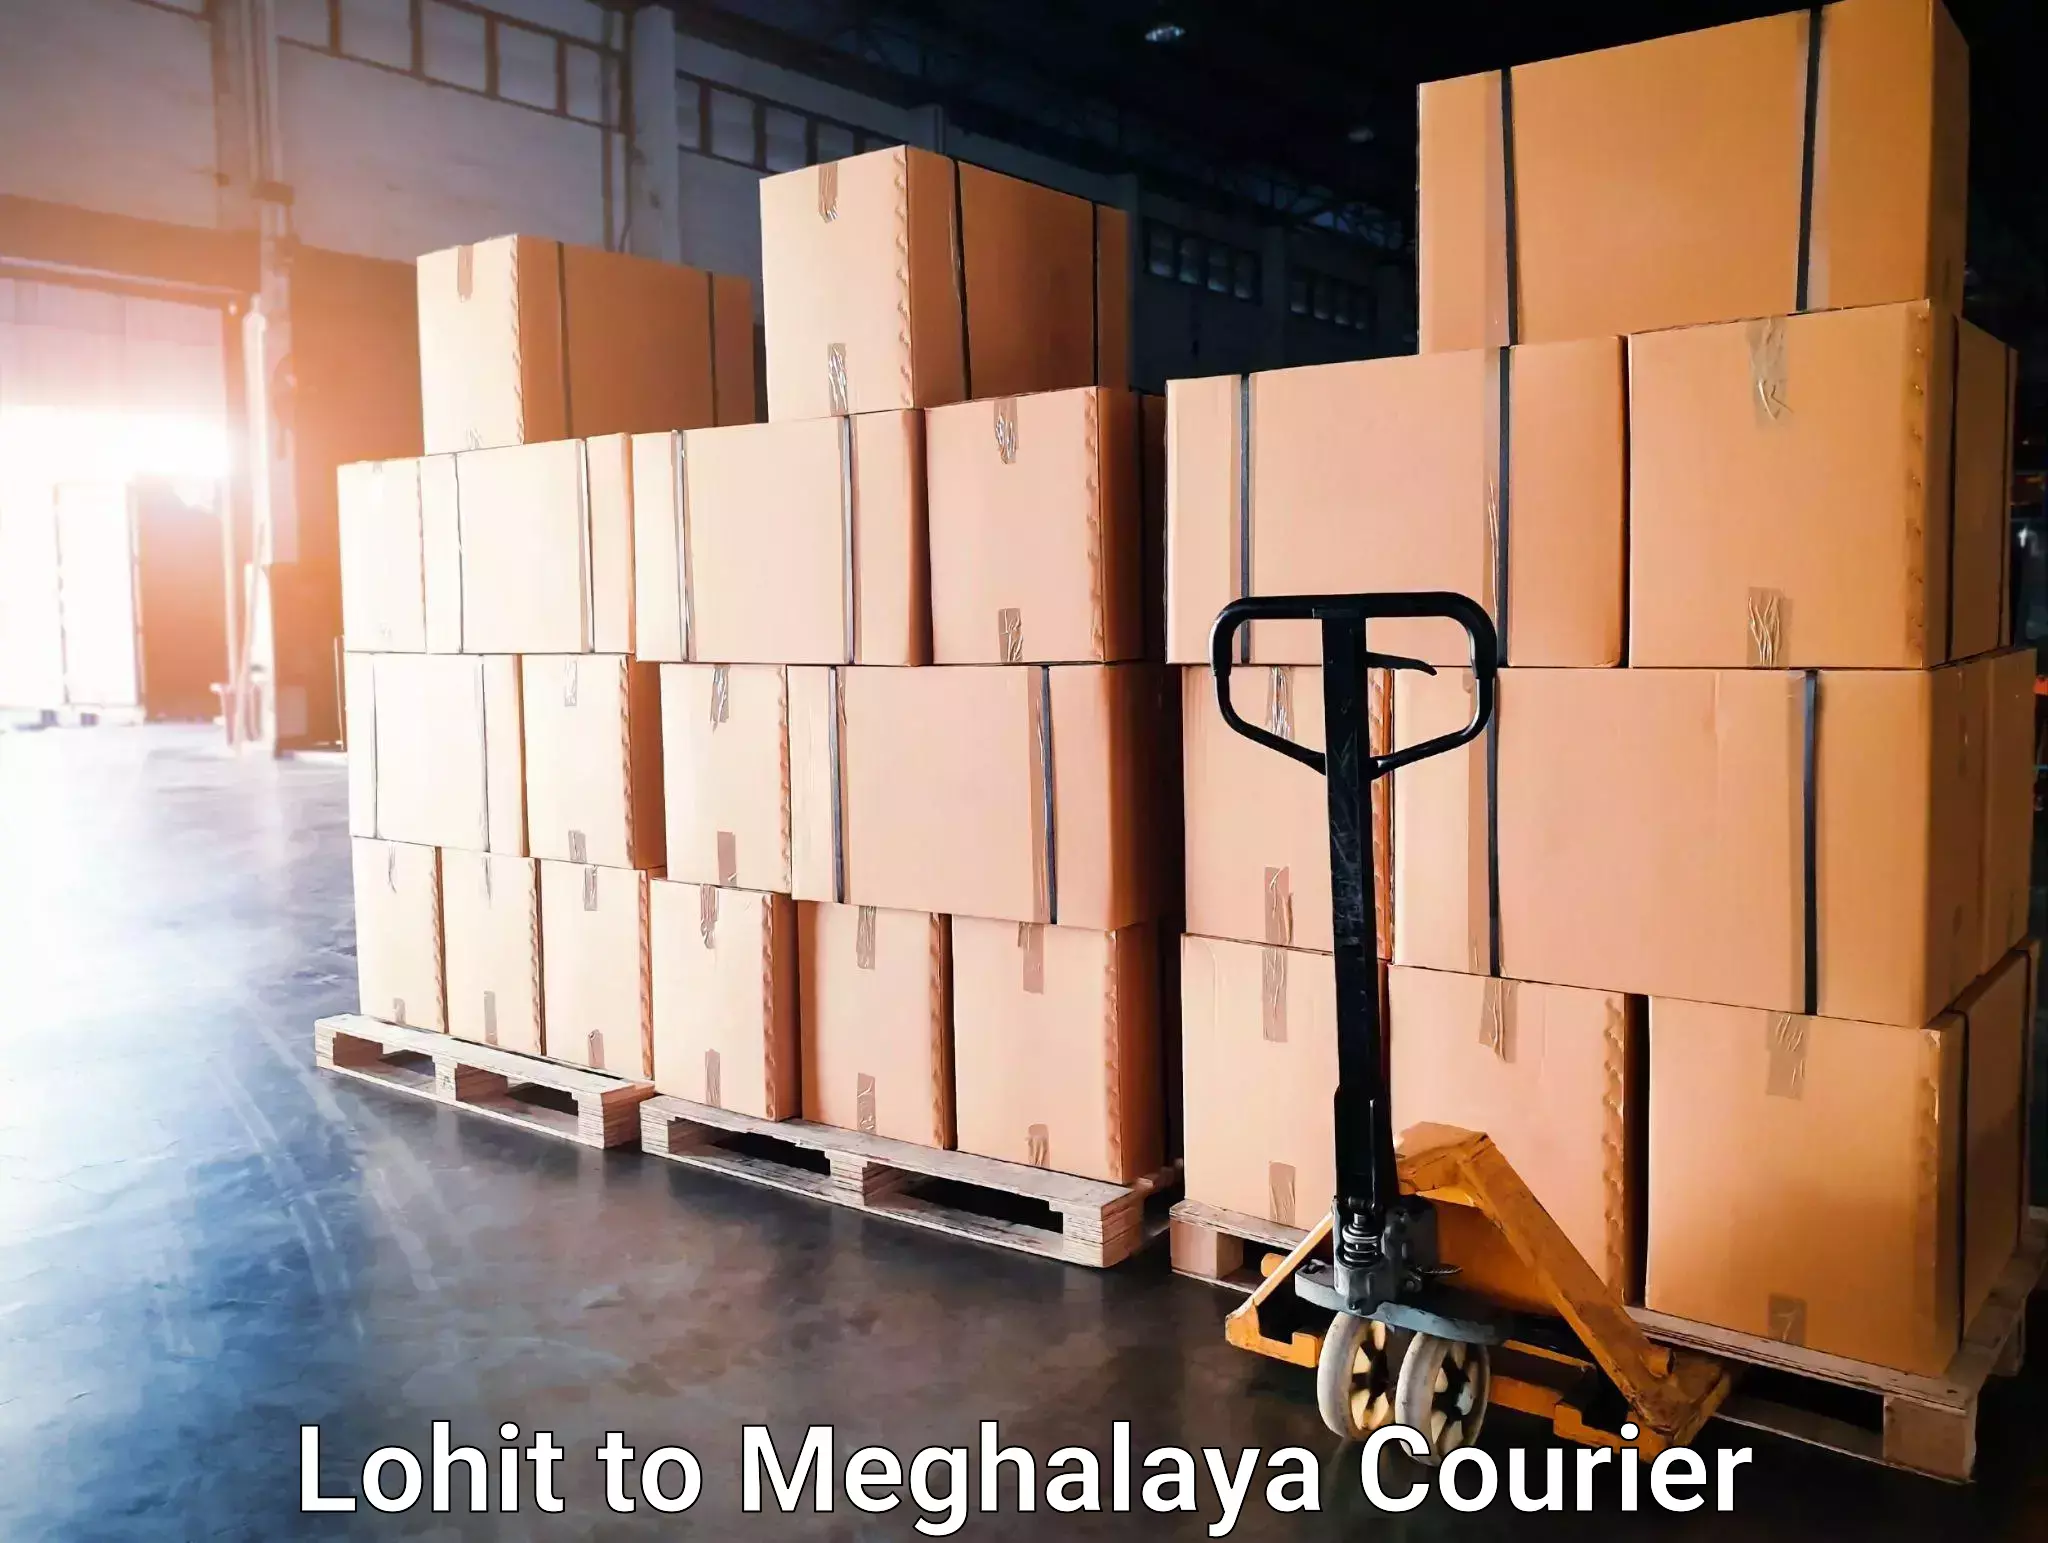 Weekend courier service Lohit to Nongstoin